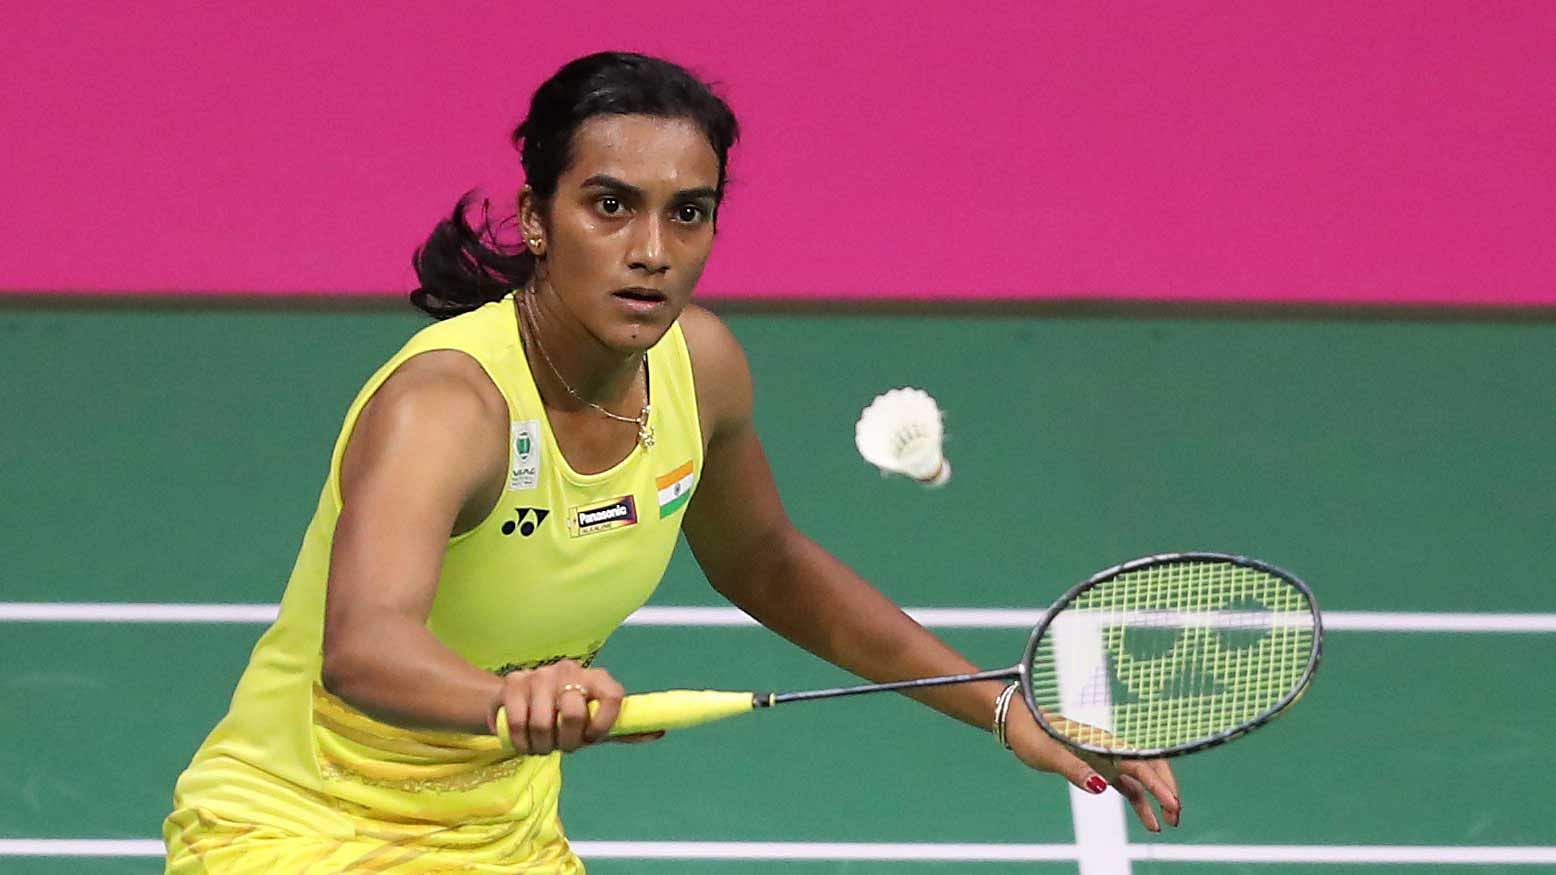 PV Sindhu lost to Nozumi Okuhara in the final of the World Badminton Championships